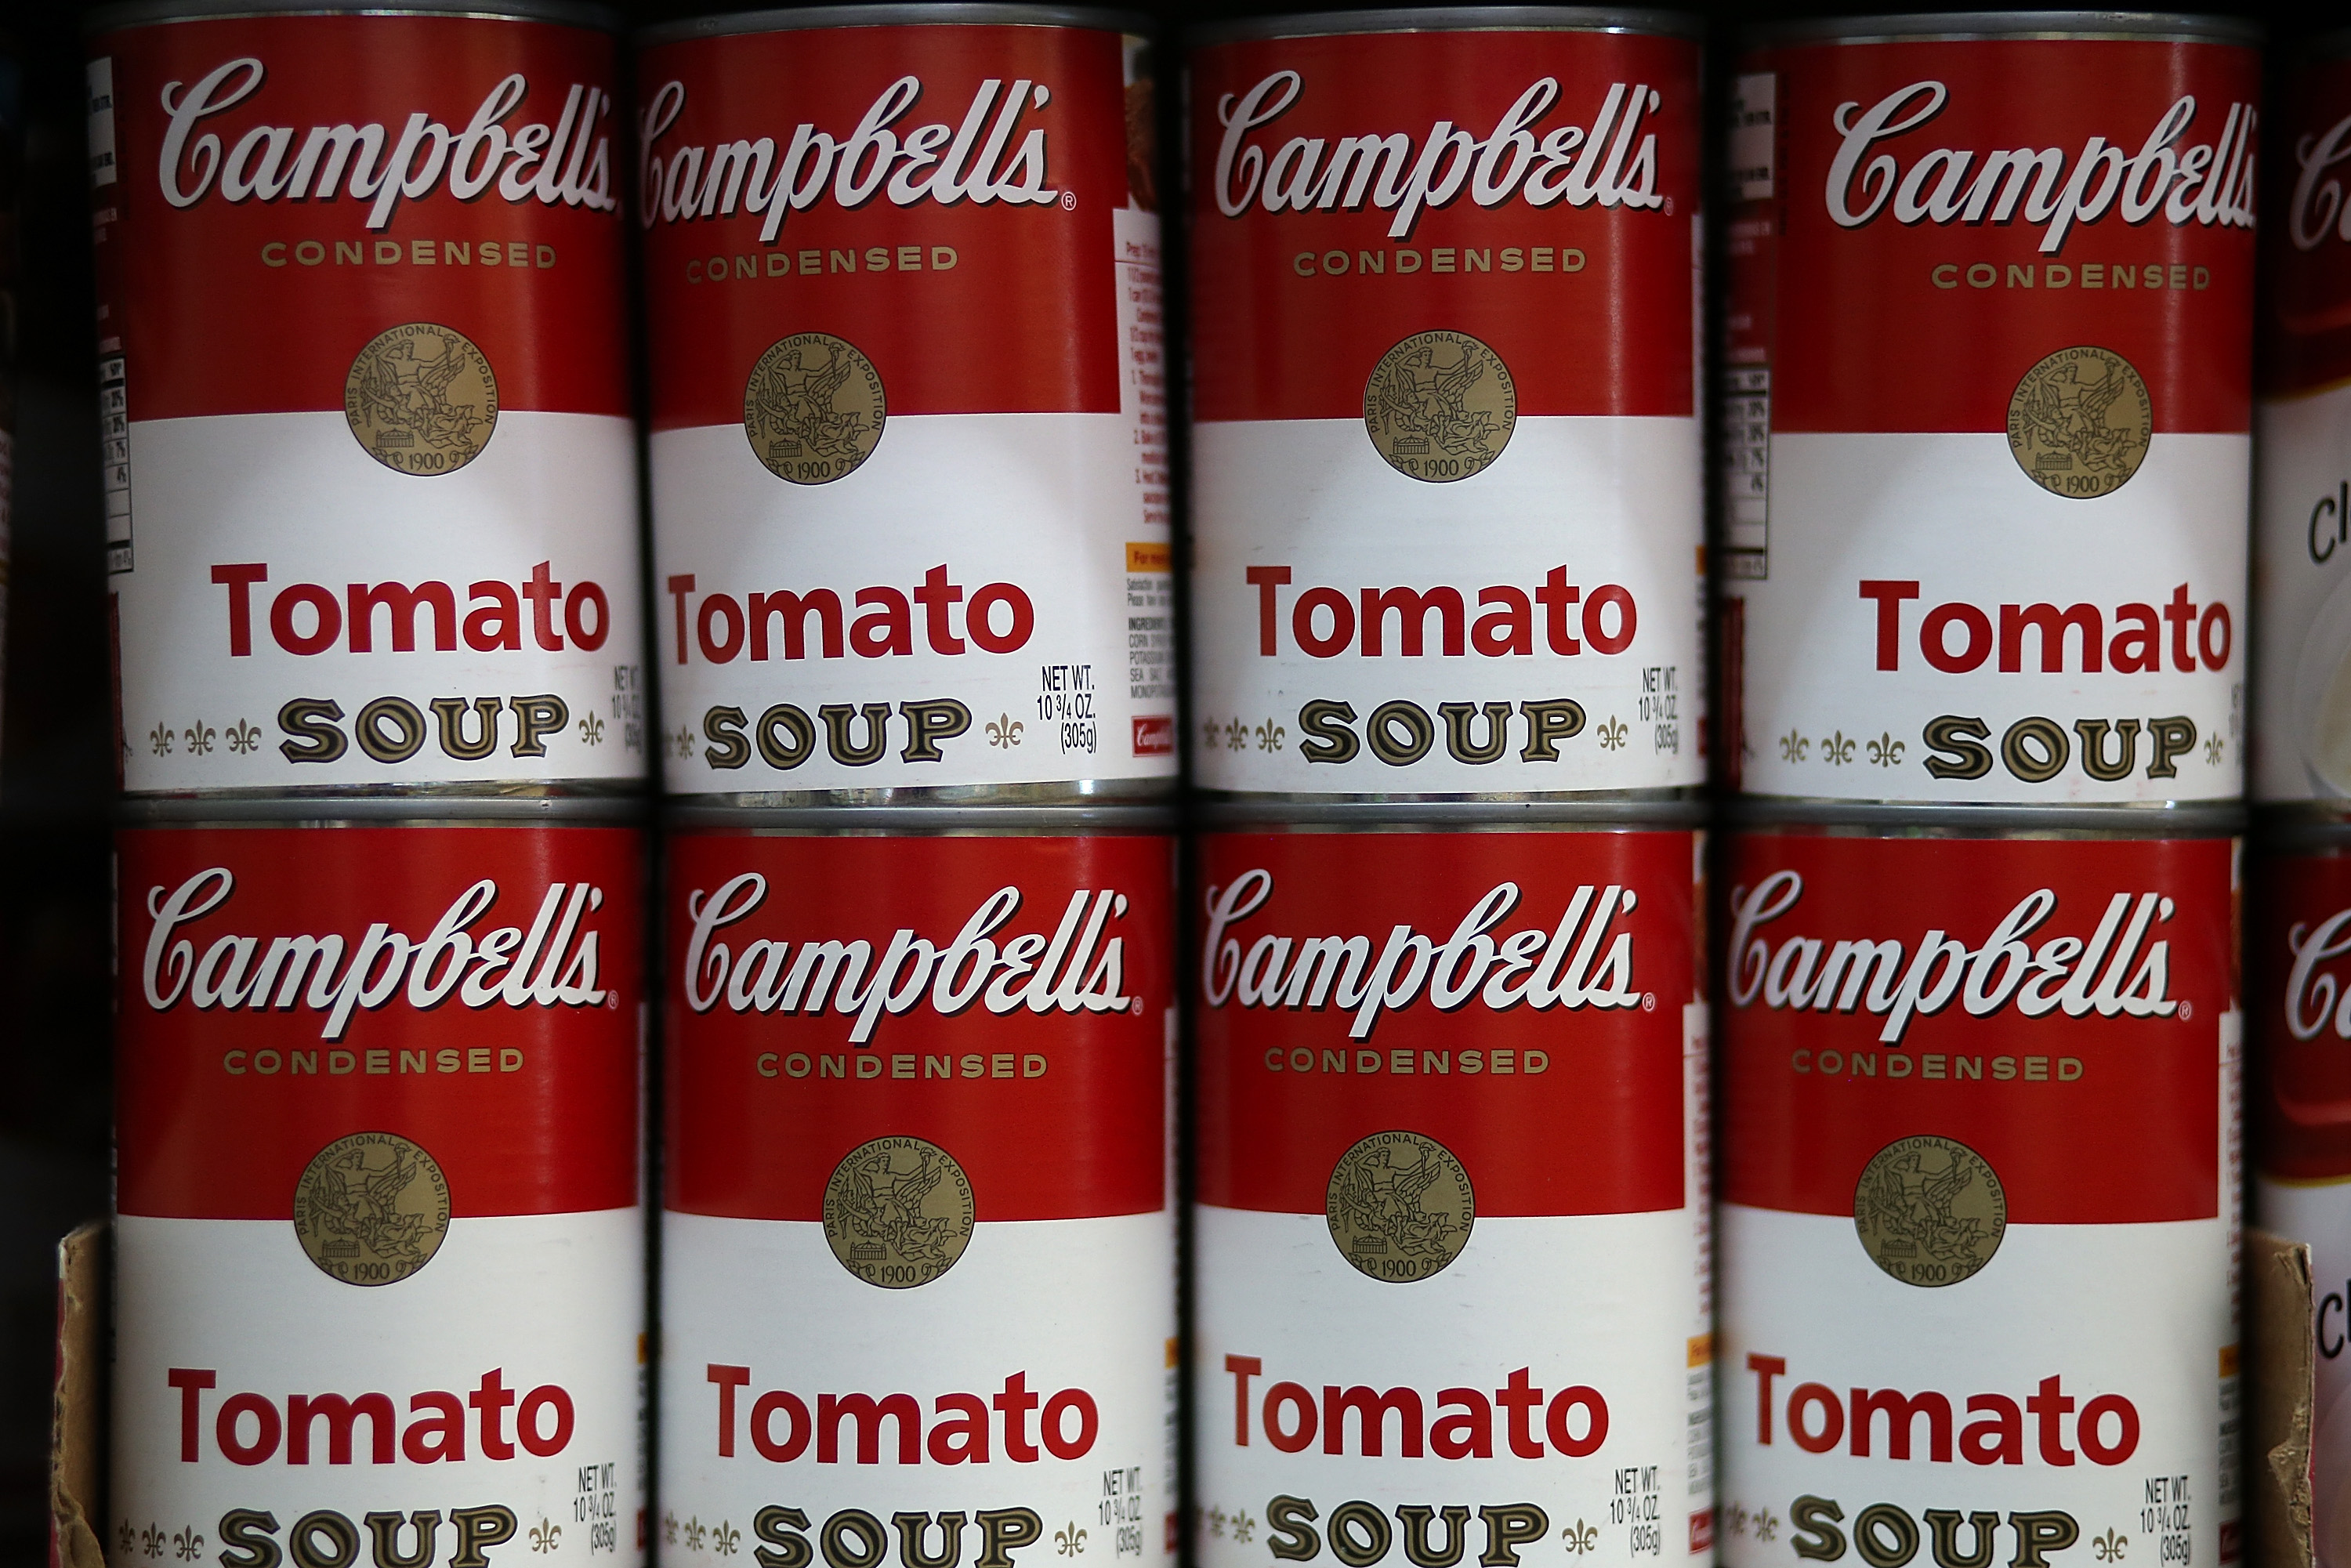 Cans of Campbell's tomato soup are displayed on a shelf at Santa Venetia Market on May 20, 2013 in San Rafael, California. (Justin Sullivan—Getty Images)